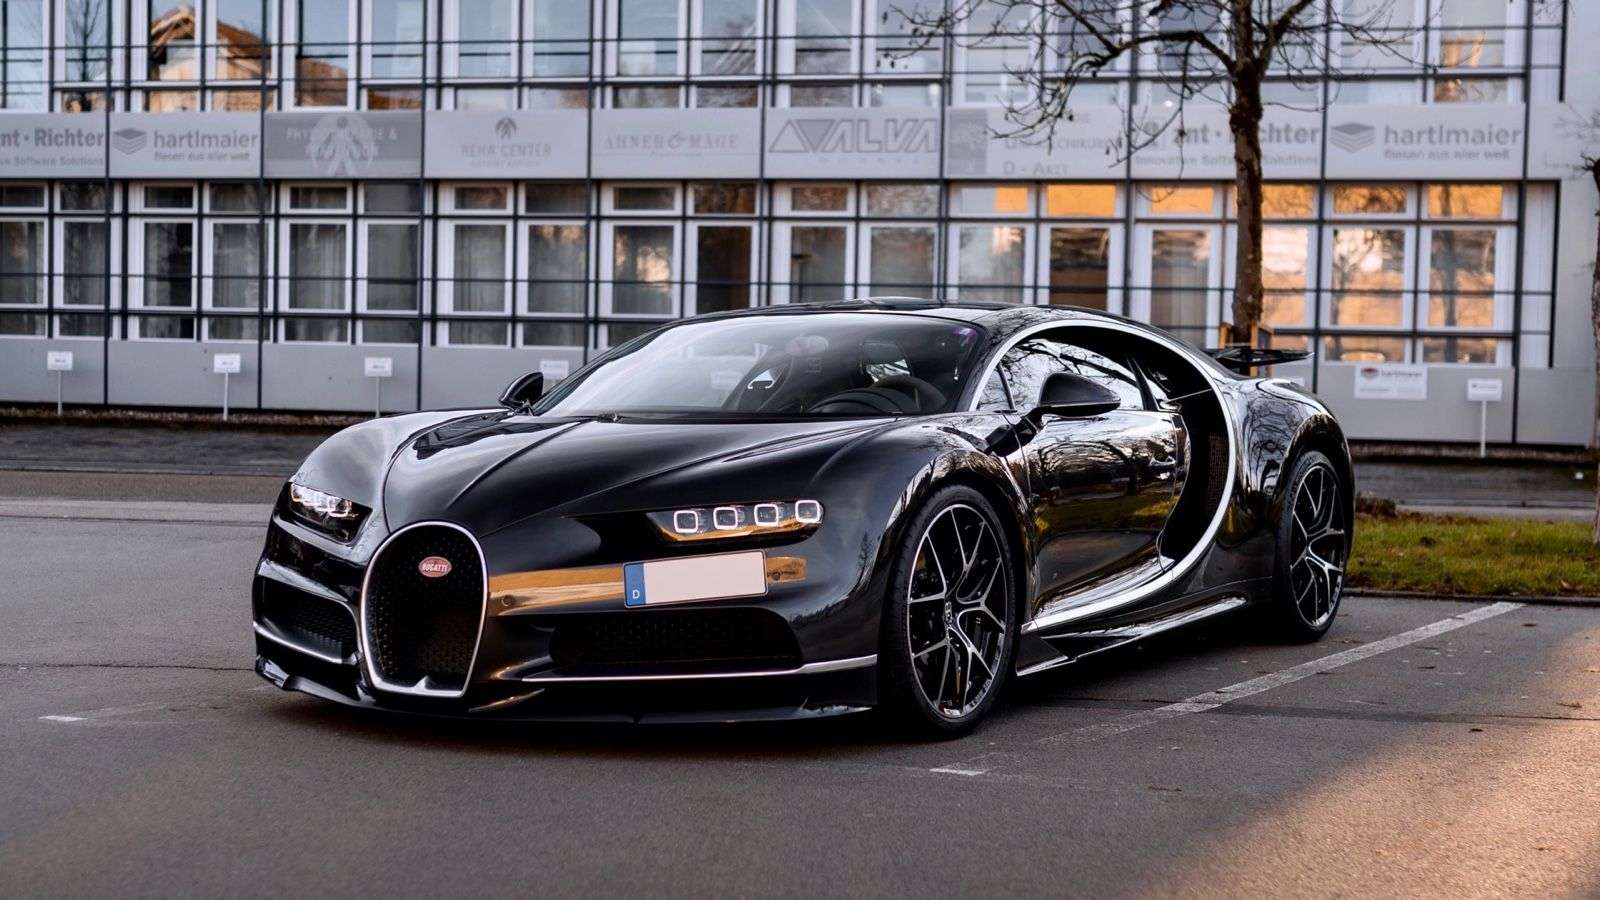 Bugatti Chiron Coupe in Grey used in Gruenwald for € 4,998,000.-